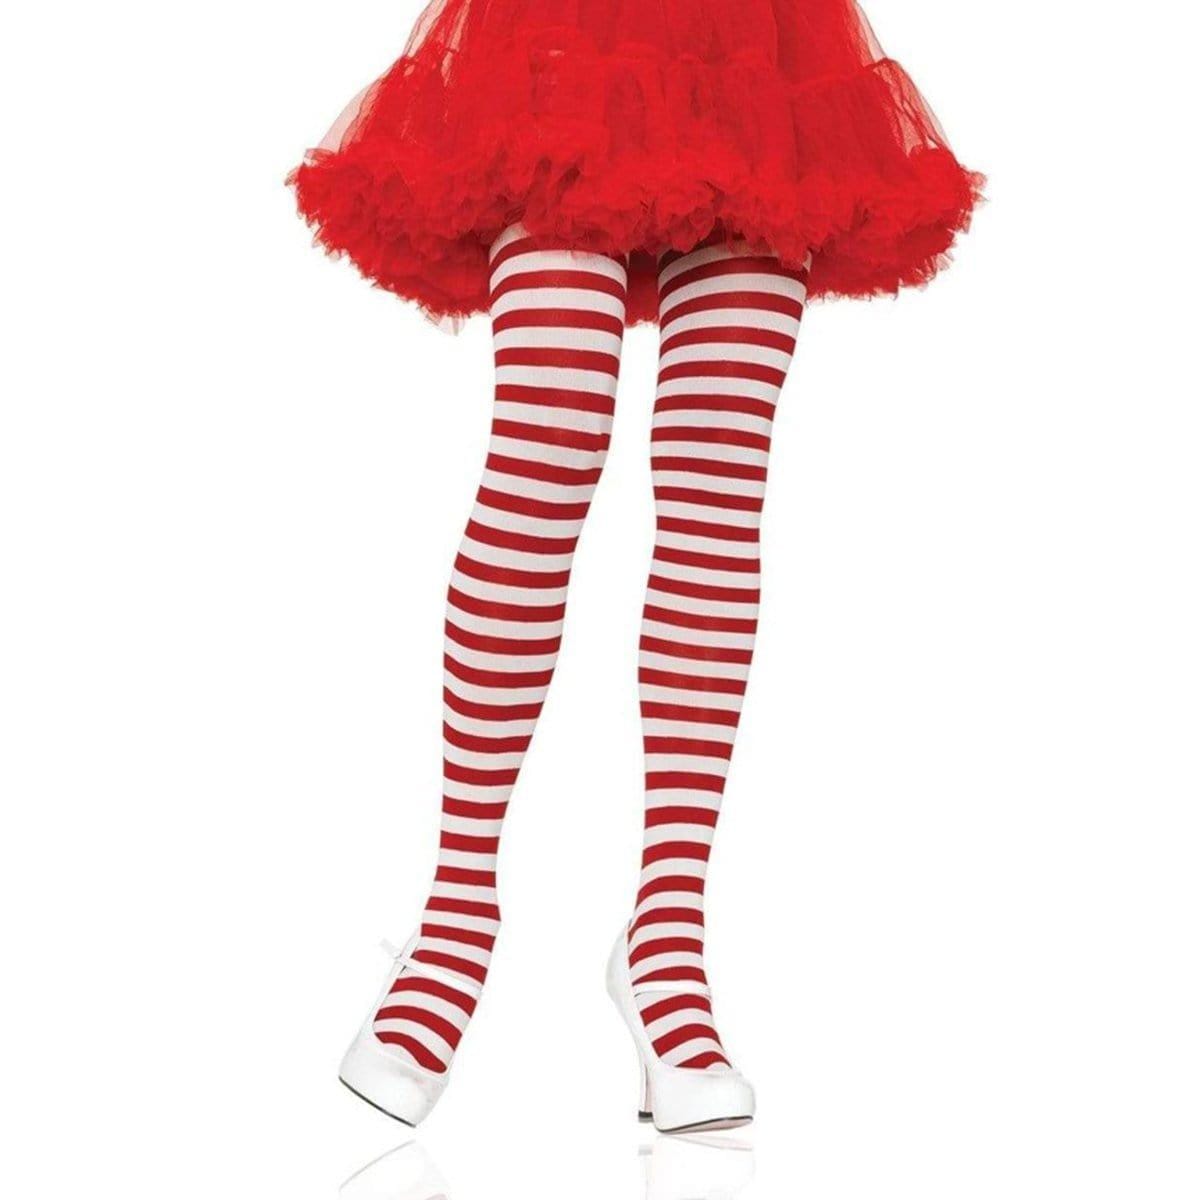 Buy Costume Accessories White & red striped nylon tights for women sold at Party Expert